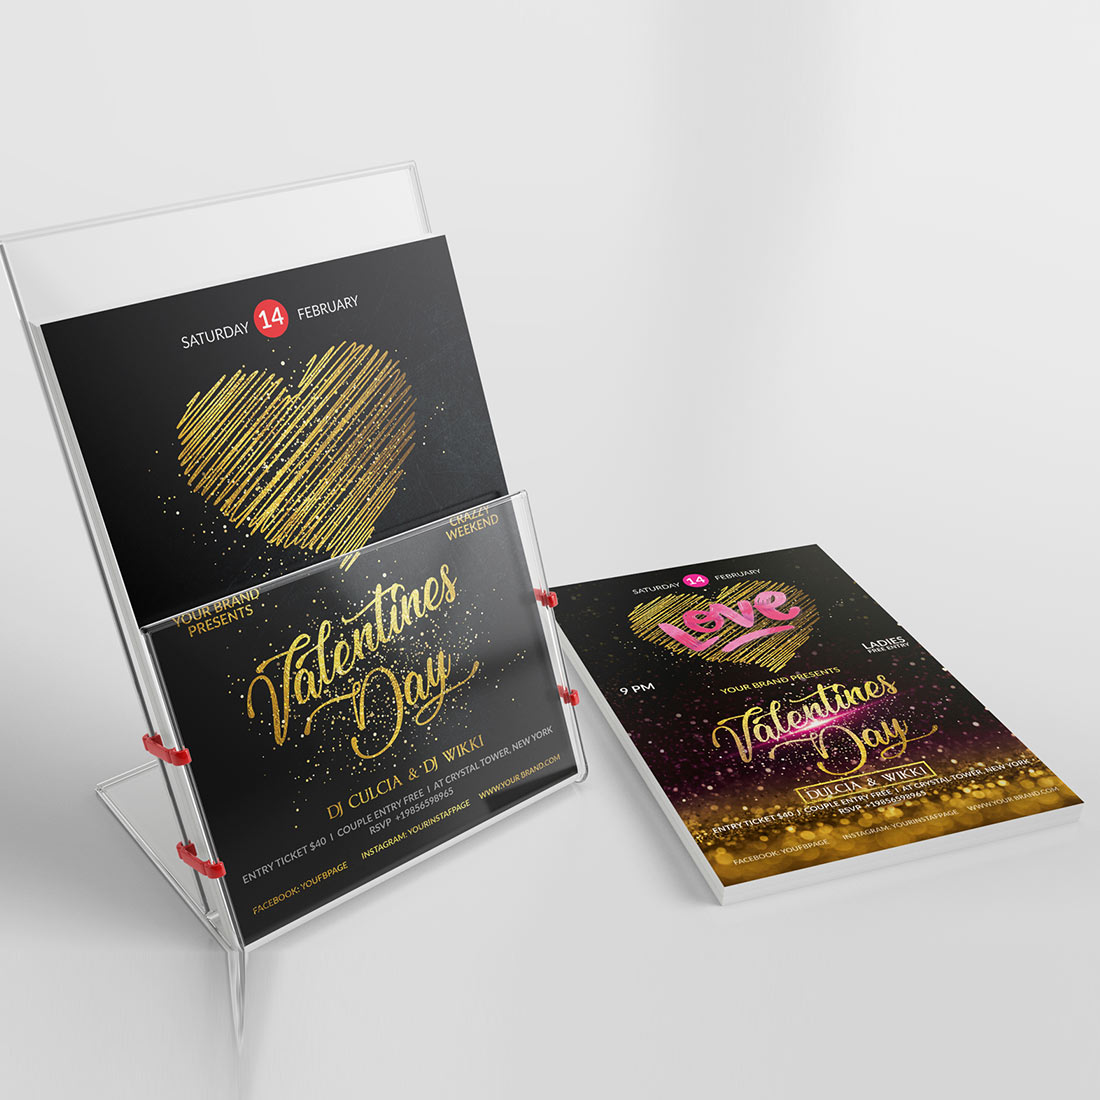 Use this flyer design for your event.